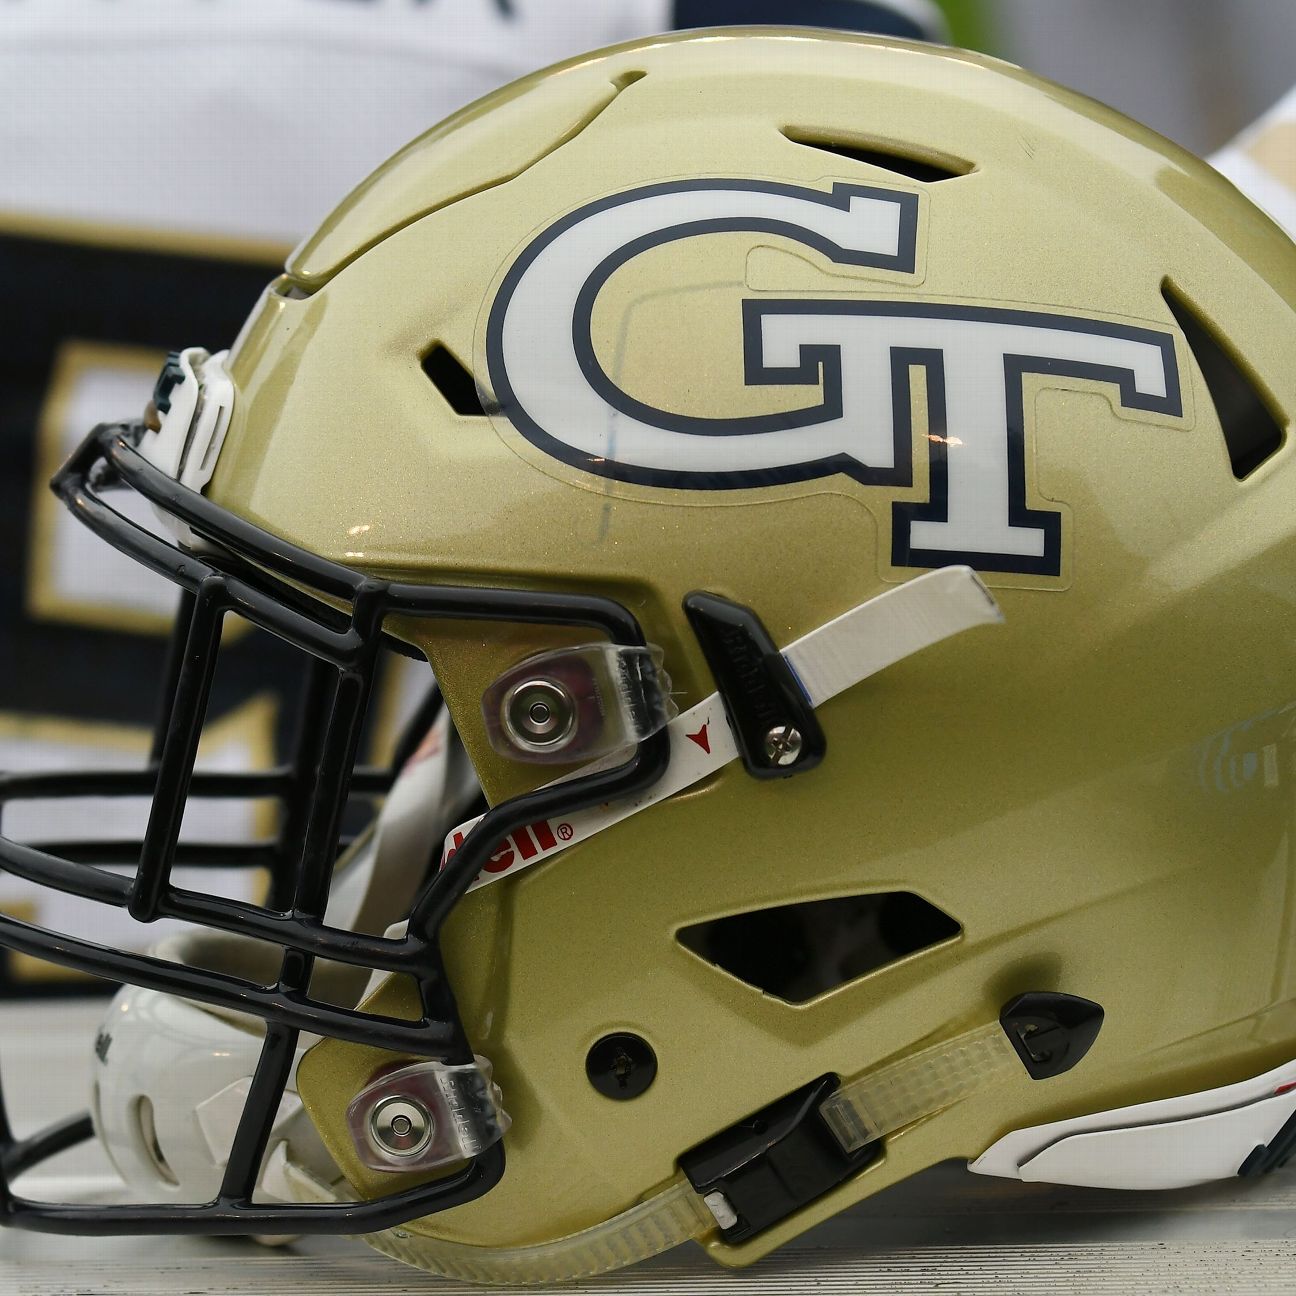 Georgia Tech appoints Chip Long as offensive coordinator